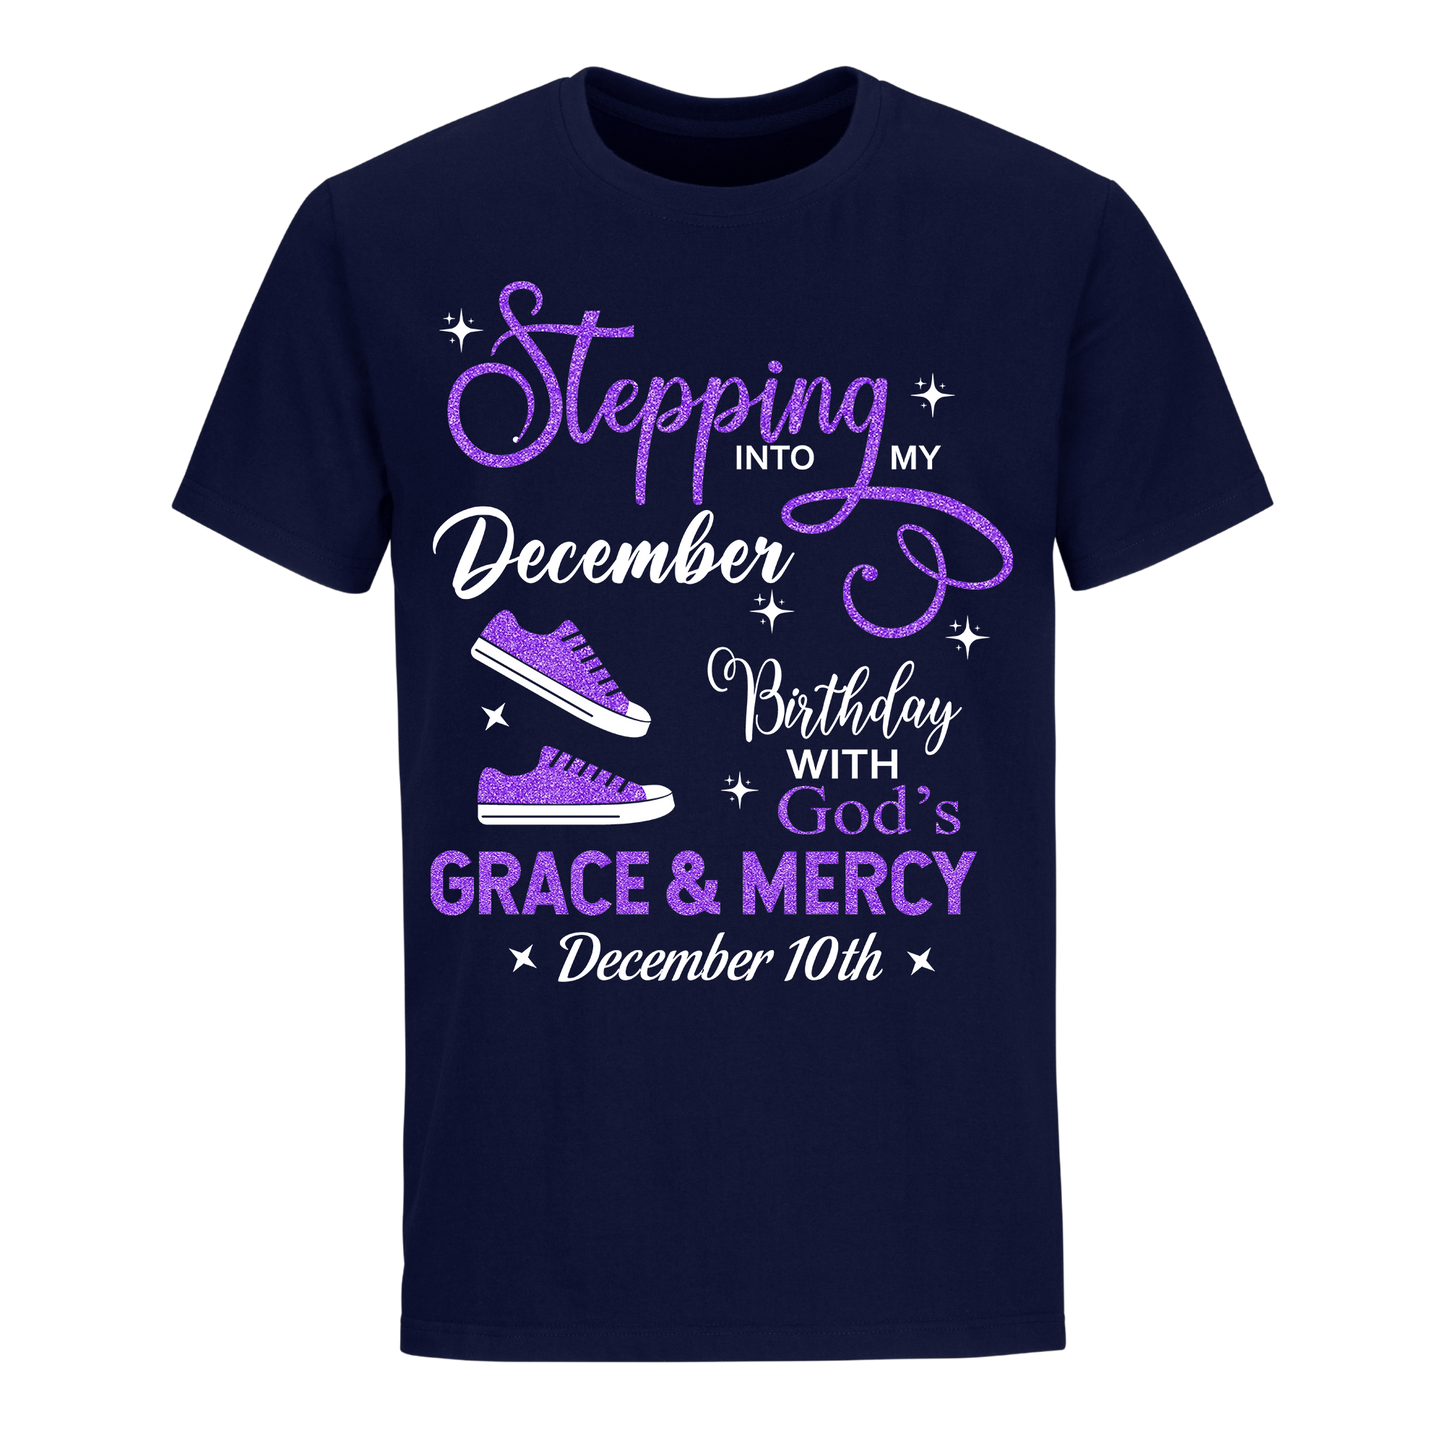 DECEMBER 10 GRACE AND MERCY